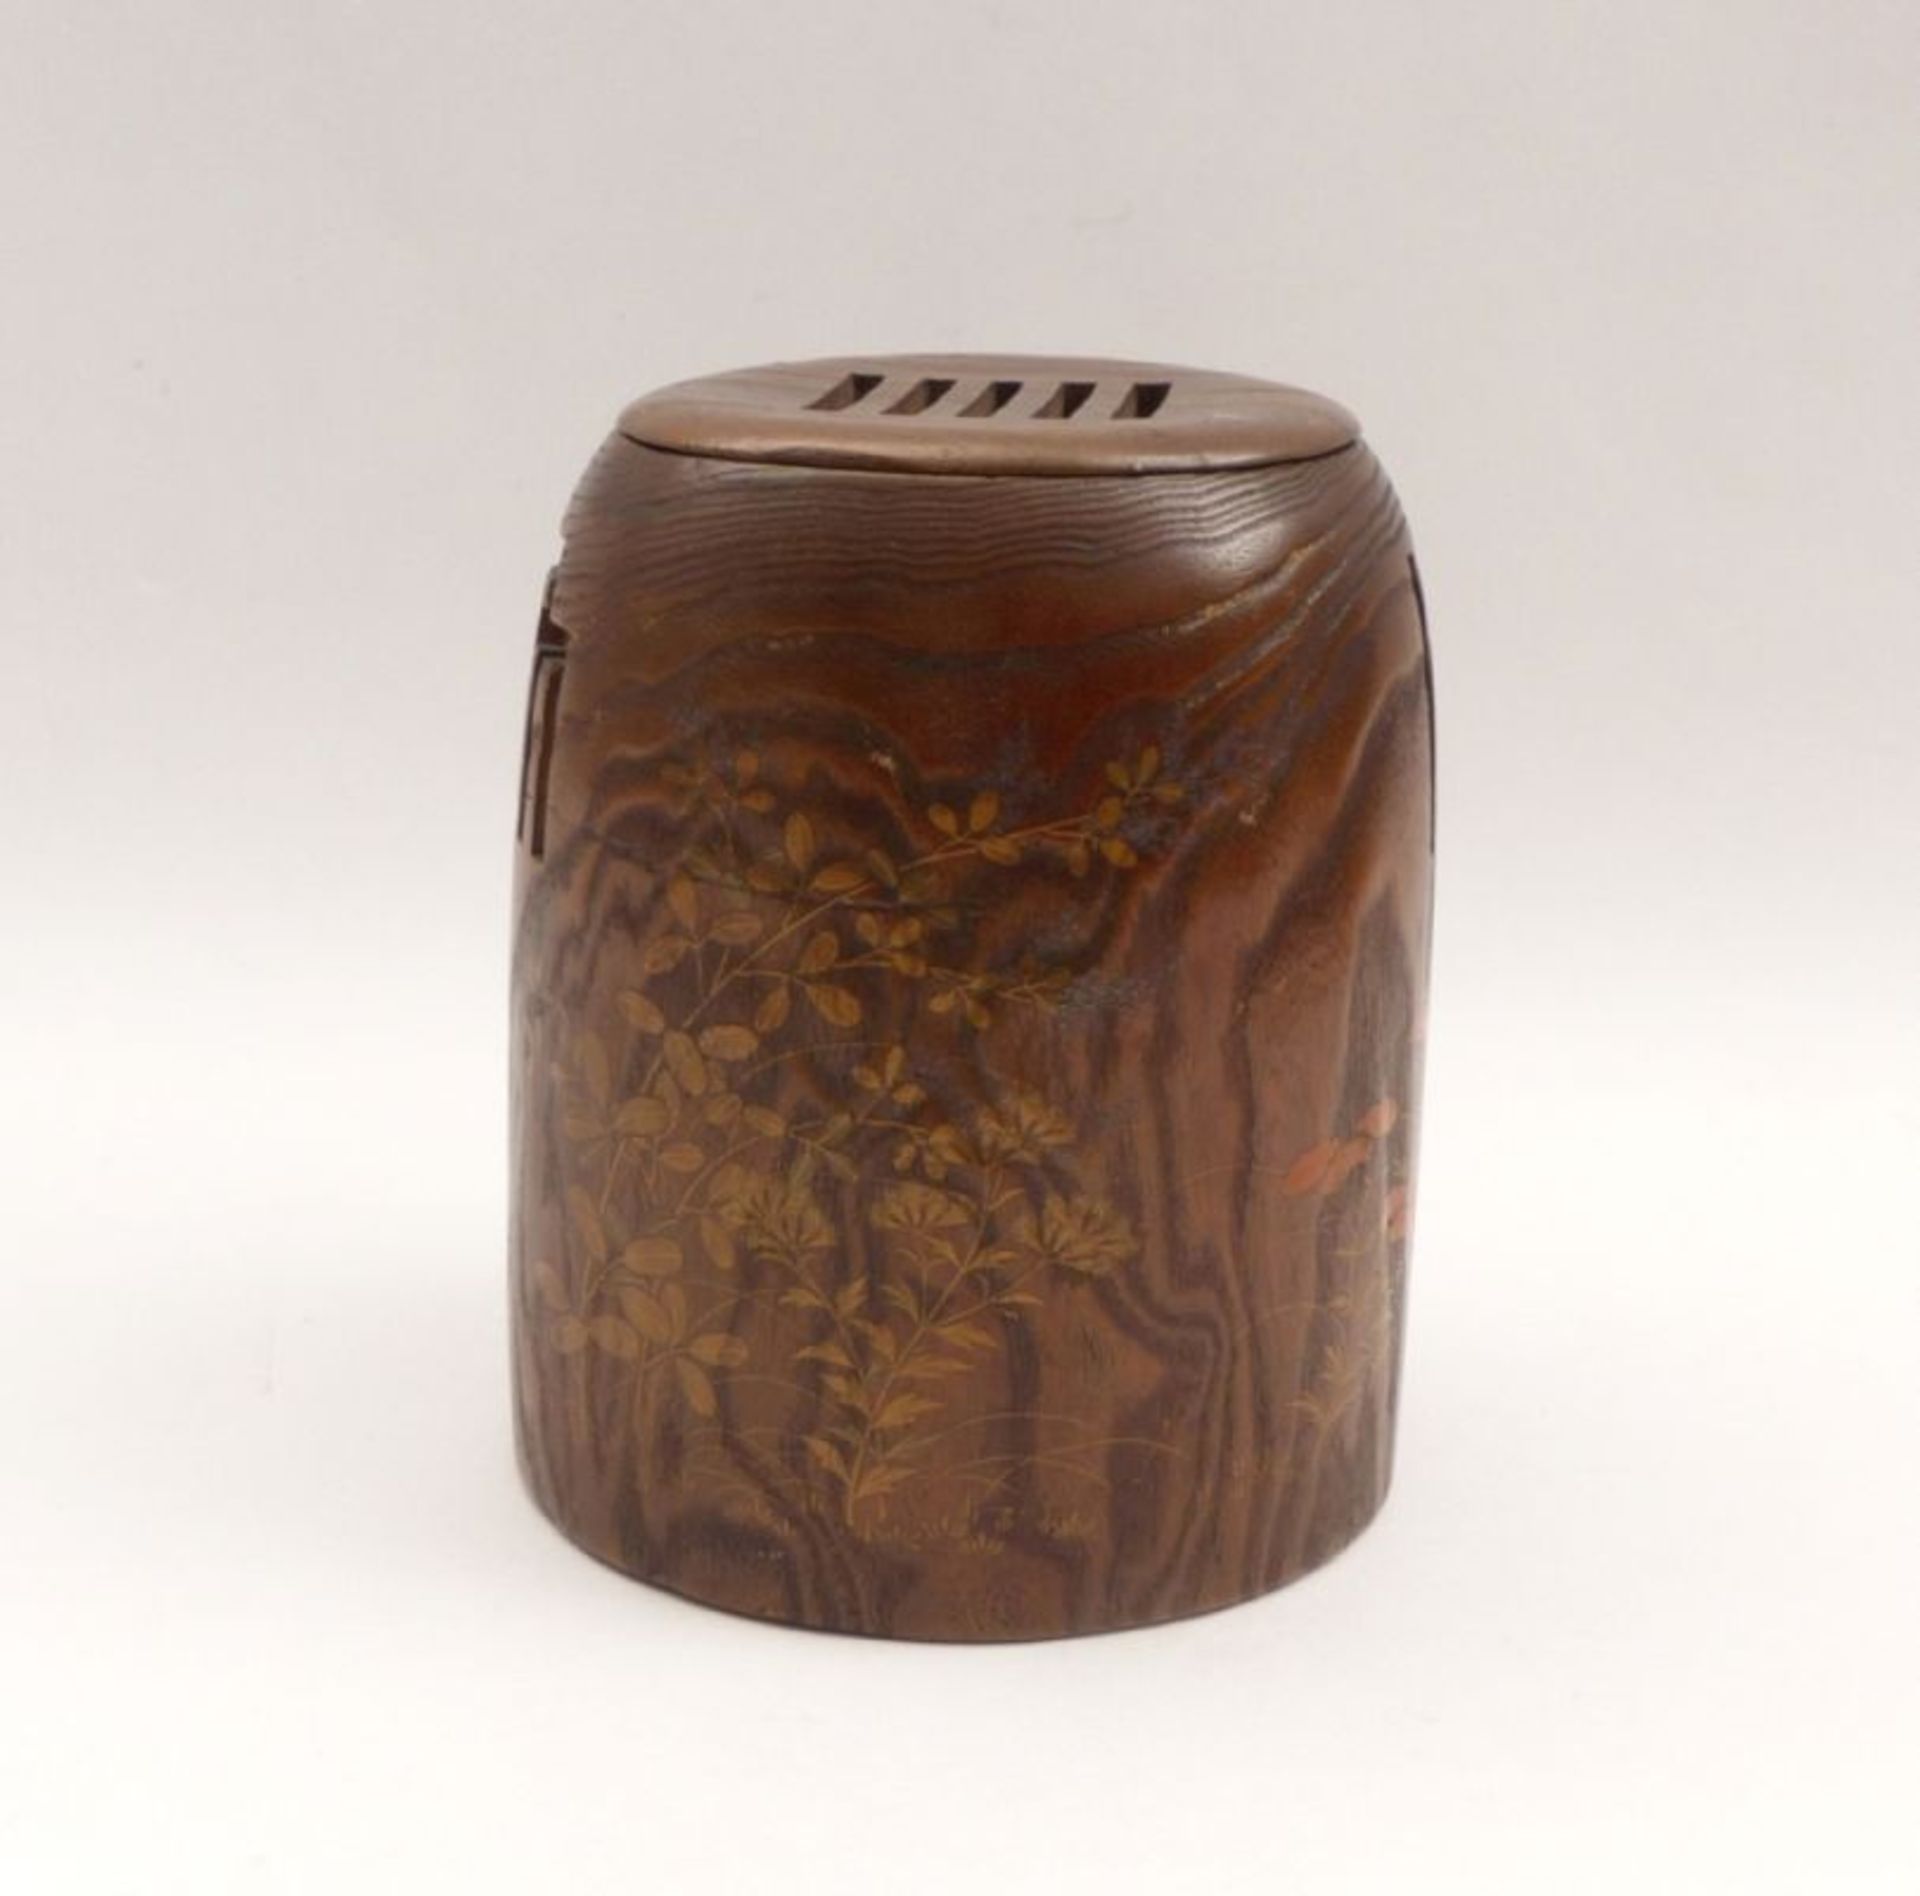 Covered holder for incense sticksJapan, Meiji PeriodWood (bamboo?), colored lacquer paint, copper - Image 3 of 3